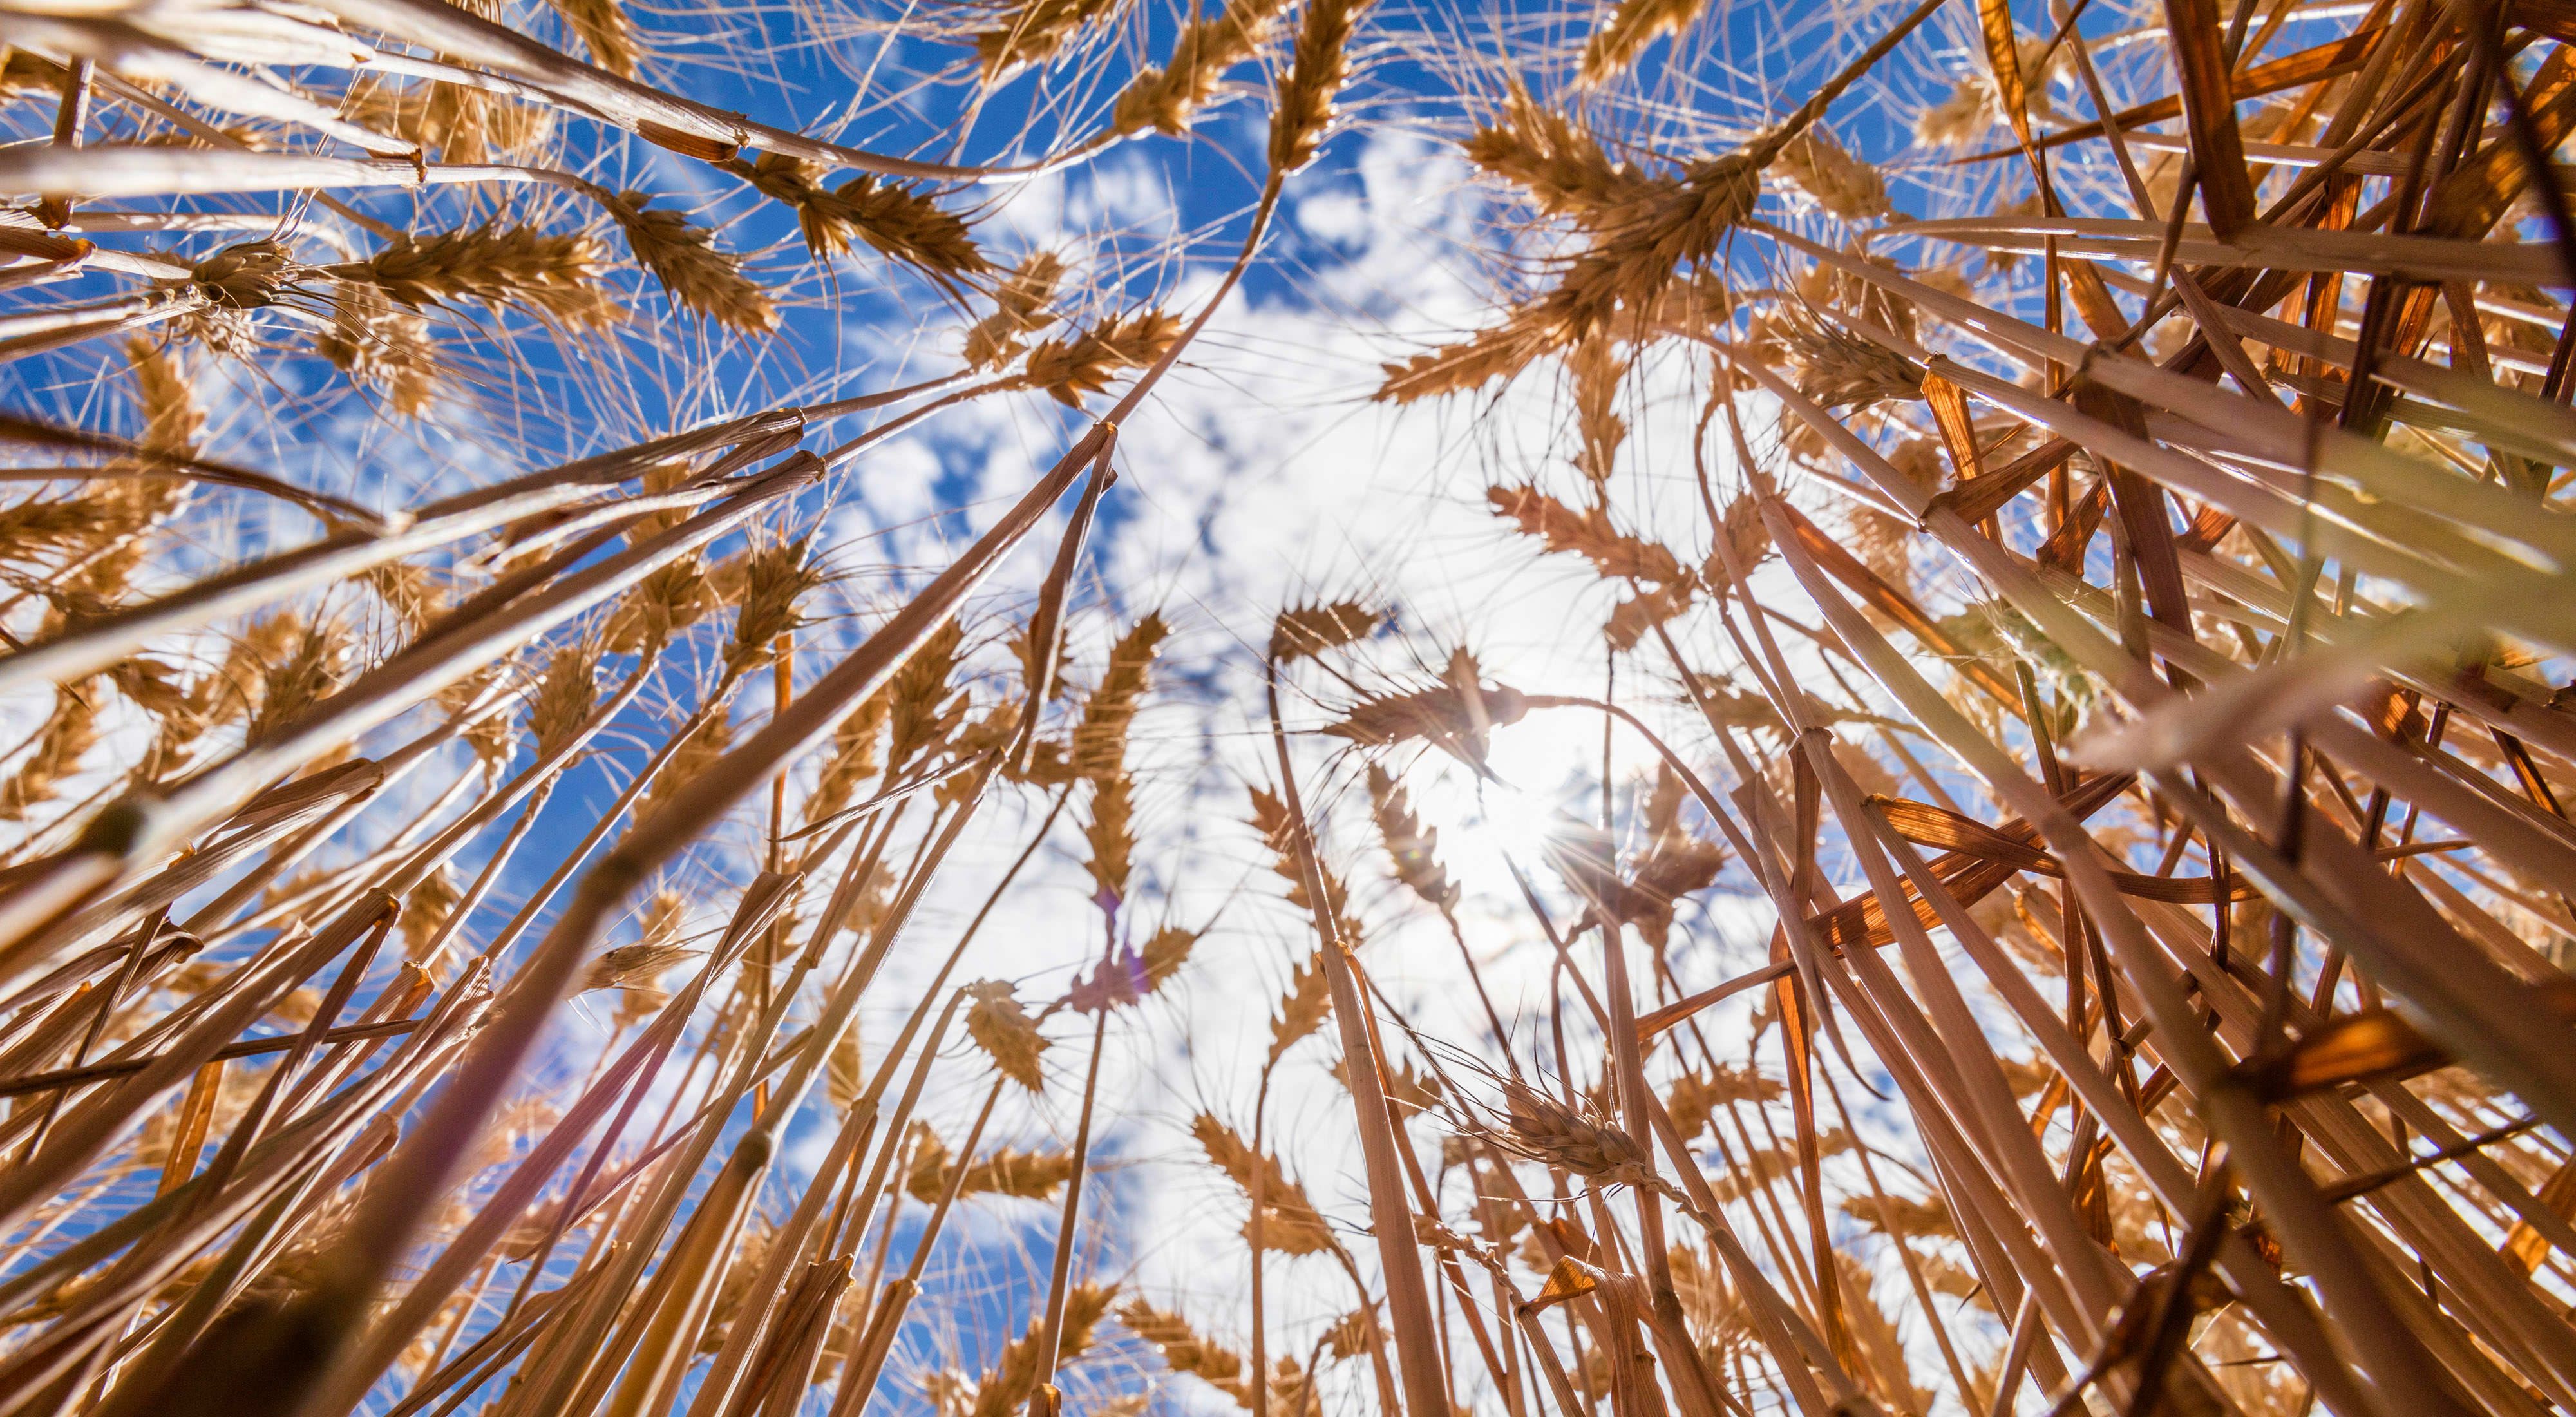 Photo from ground level looking upward at wheat crops and sky.